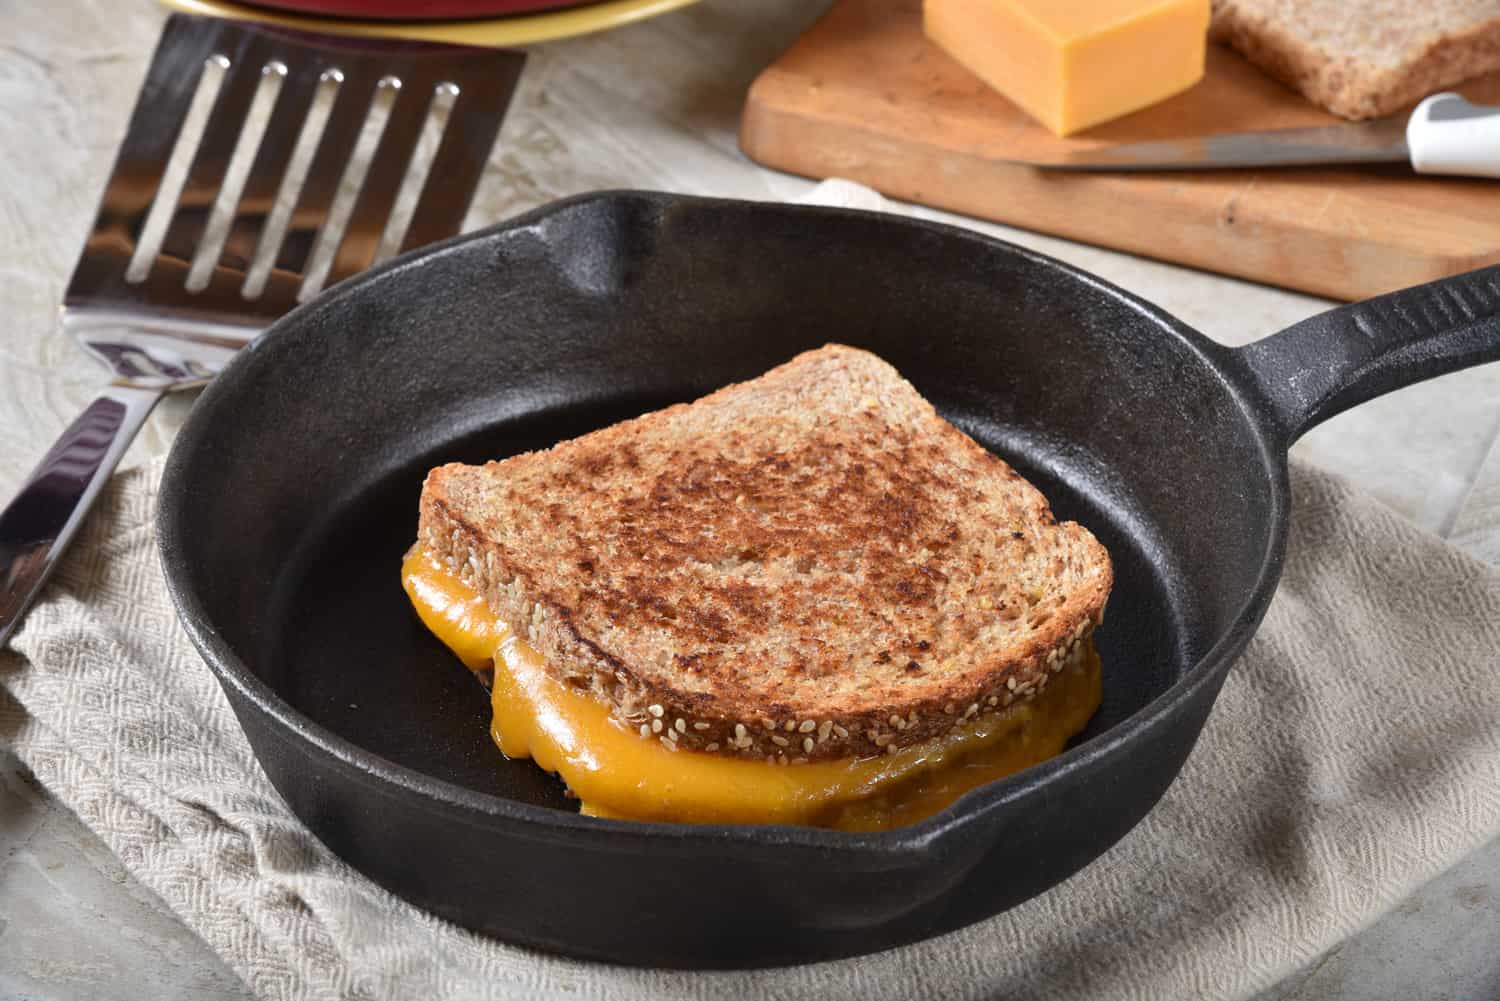 A grilled cheese sandwich on sprouted multi-grain bread in a cast iron skillet